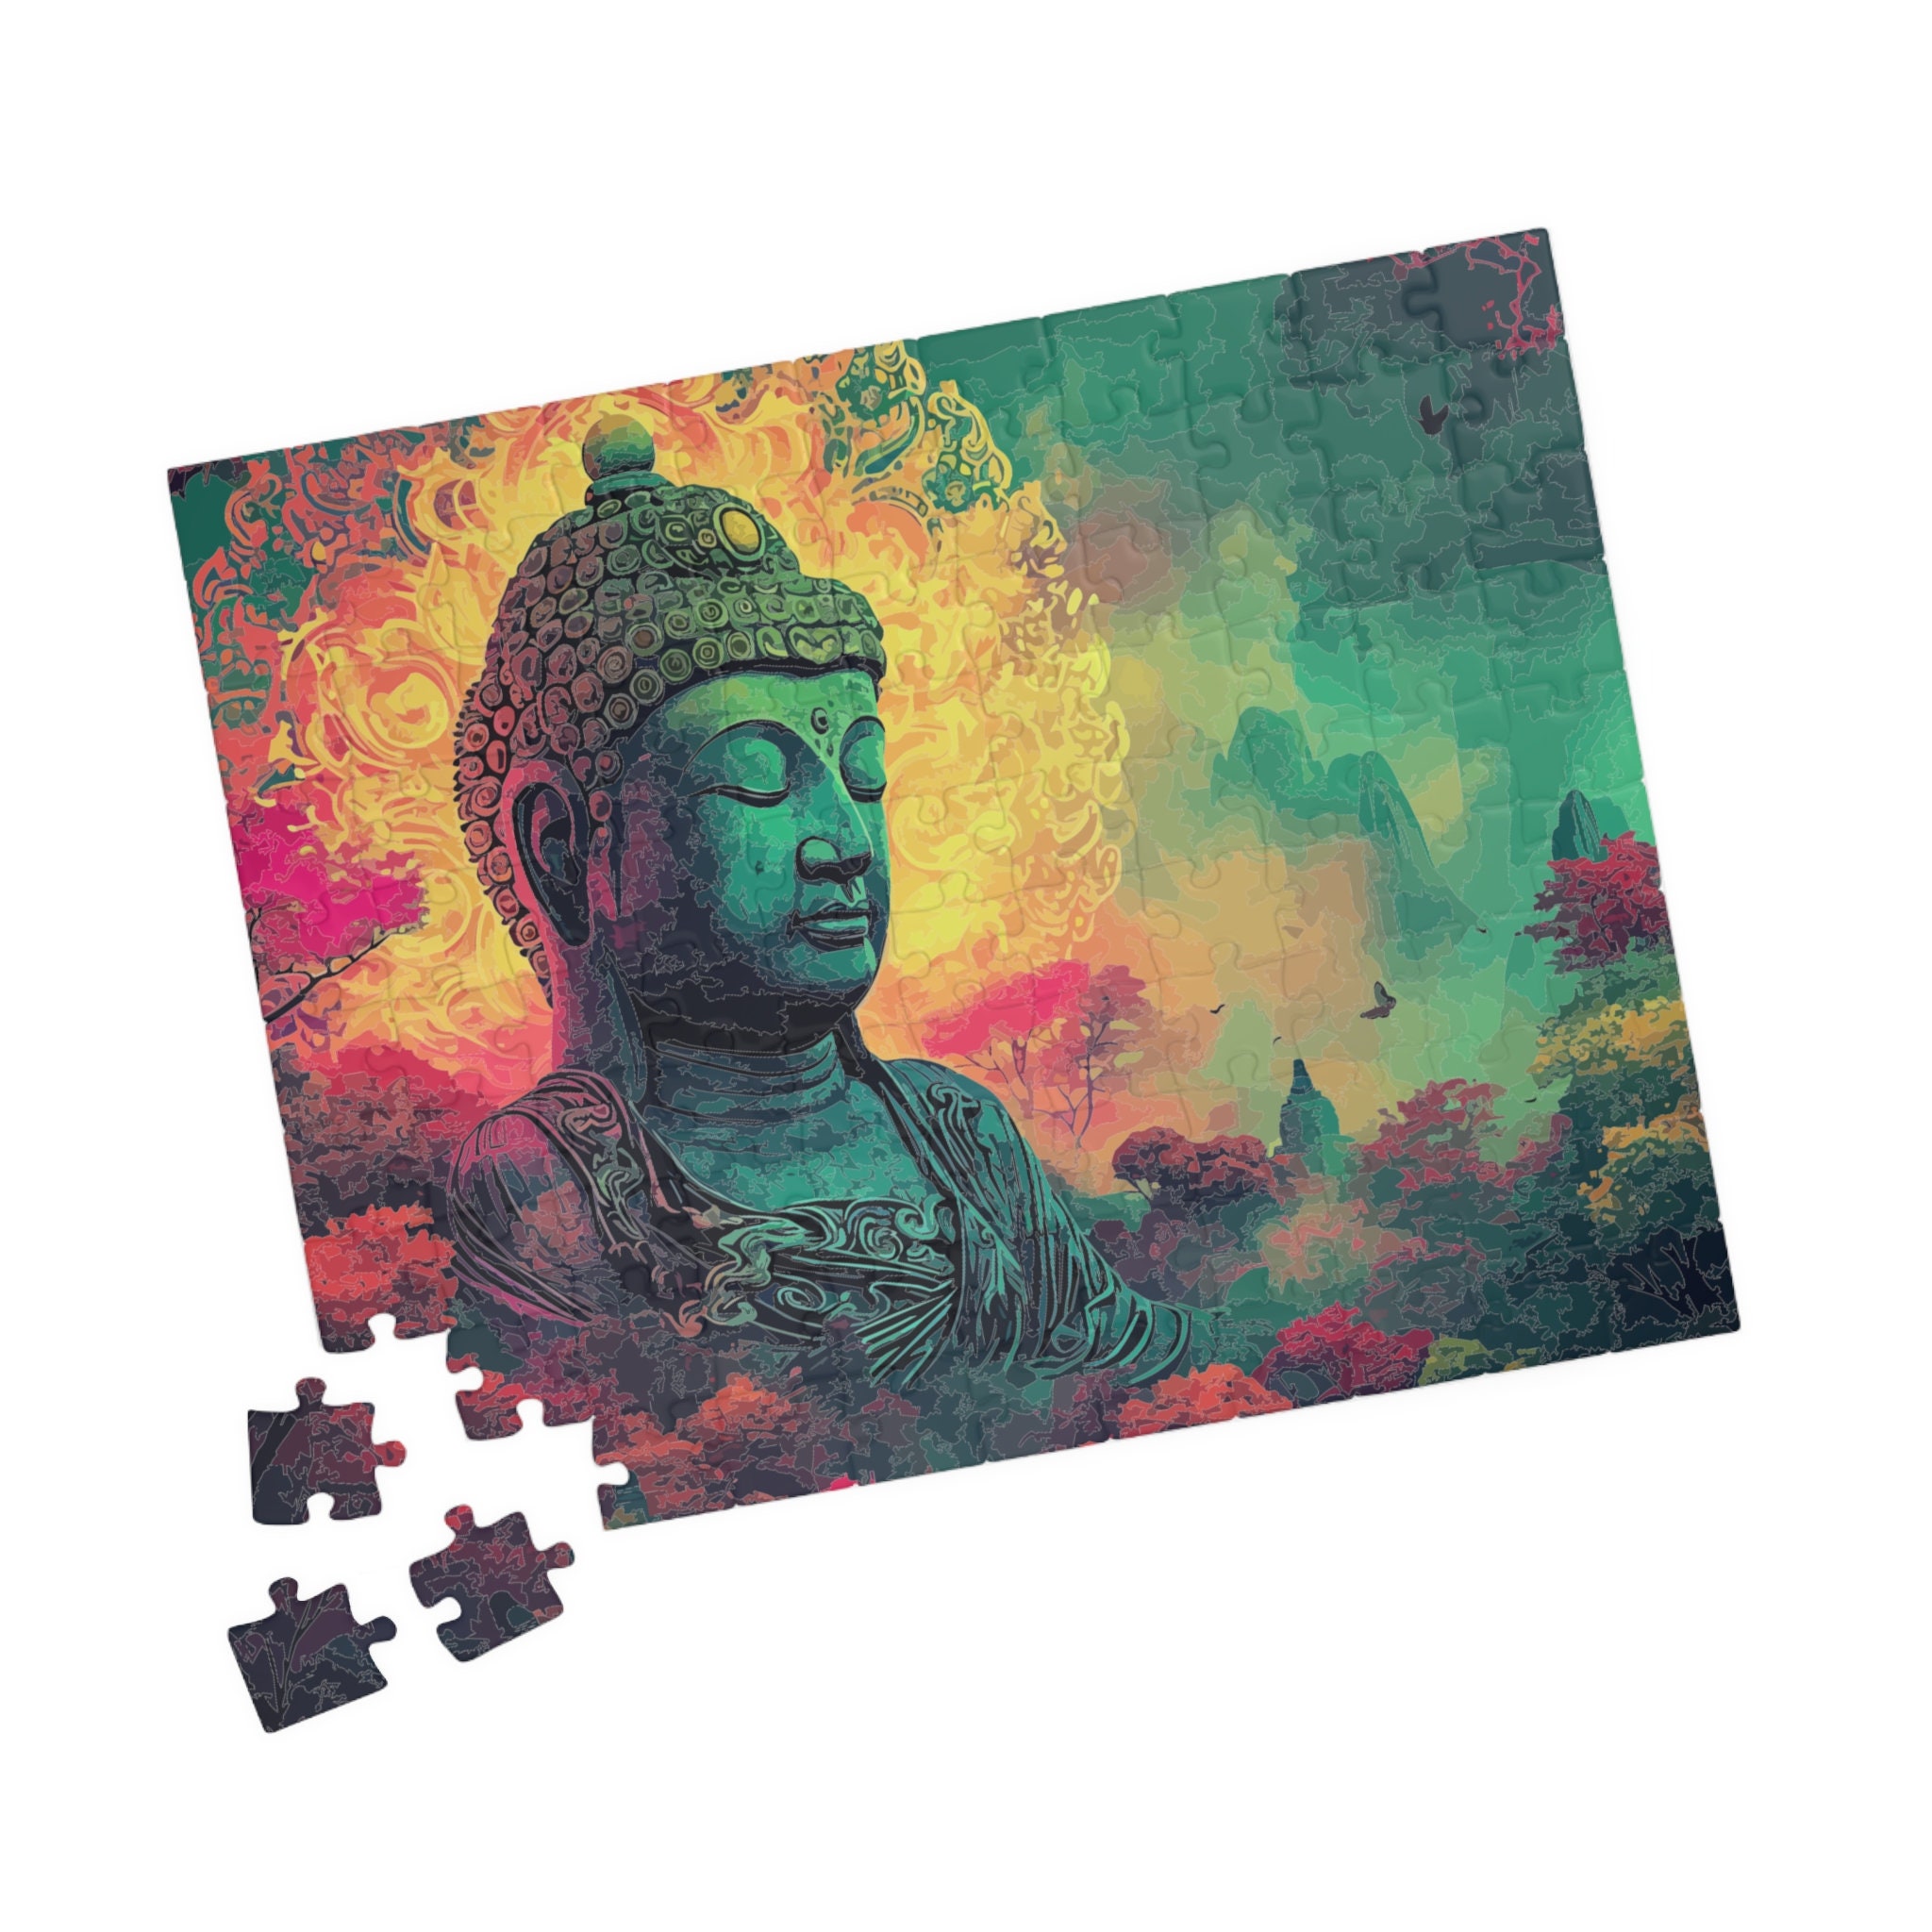 CALVENDO Puzzle Buddha and Yin Yang 1000 Pieces 64 x 48 cm from Digital-Art